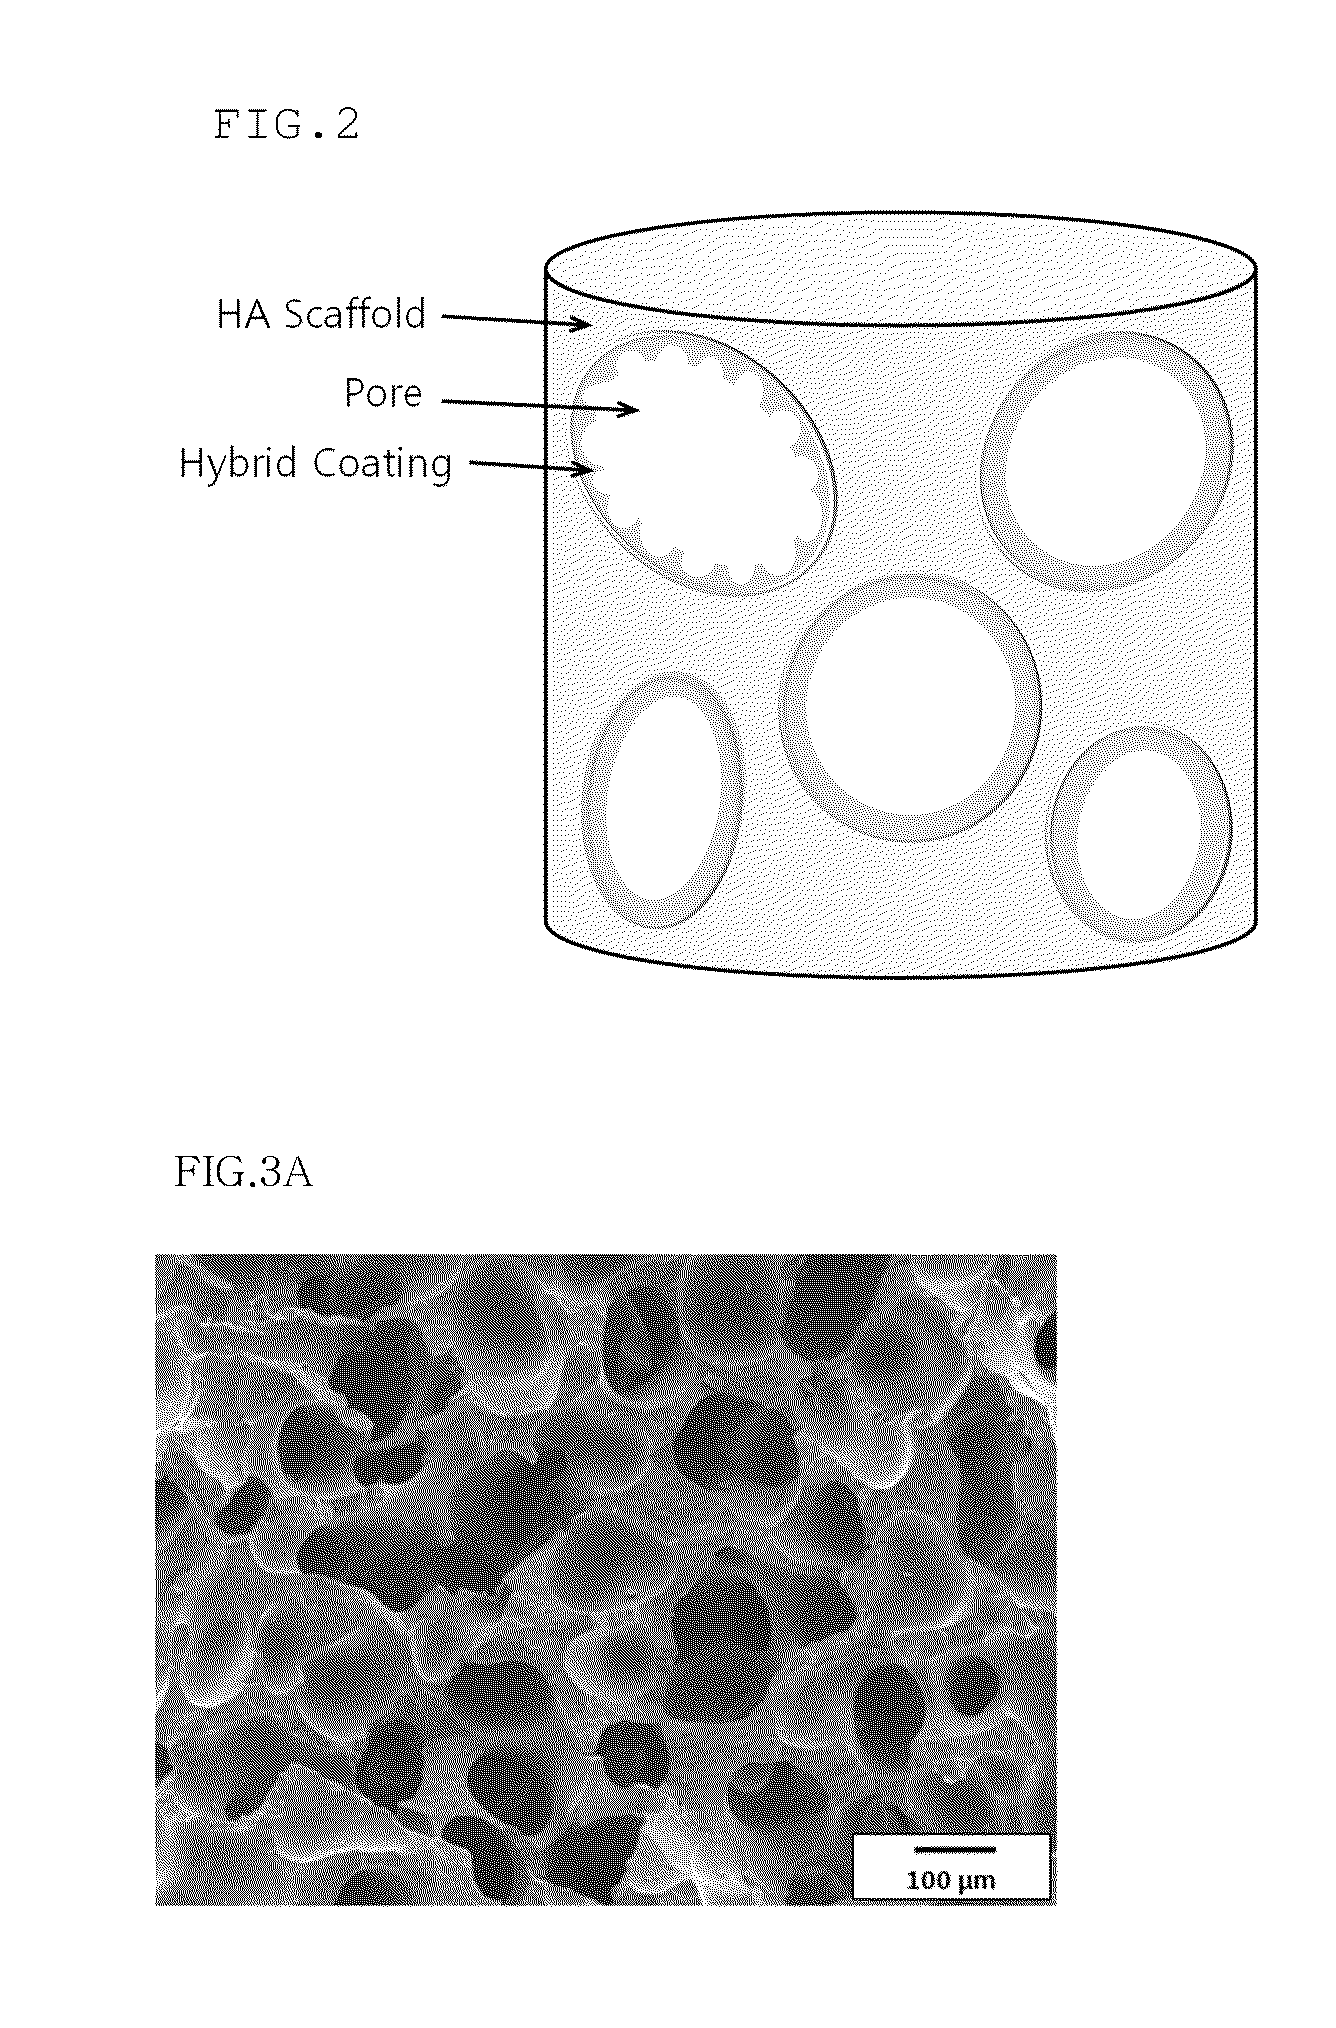 Method for manufacturing a porous ceramic scaffold having an organic/inorganic hybrid coating layer containing a bioactive factor